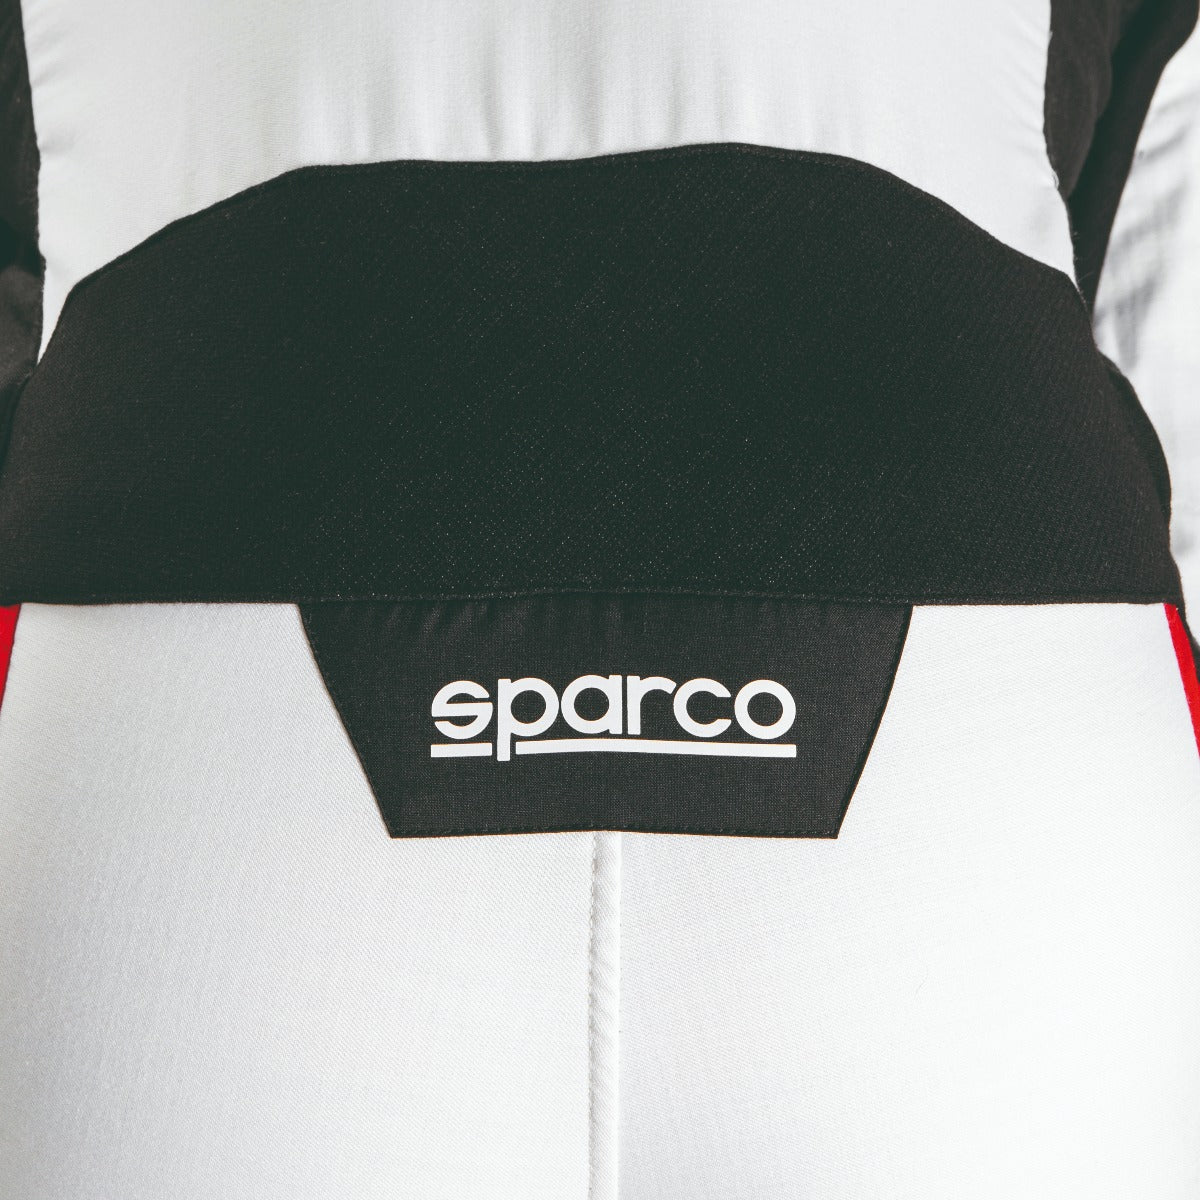 SPARCO VICTORY 2.0 RACE SUIT BLACK / WHITE BACK IMAGE